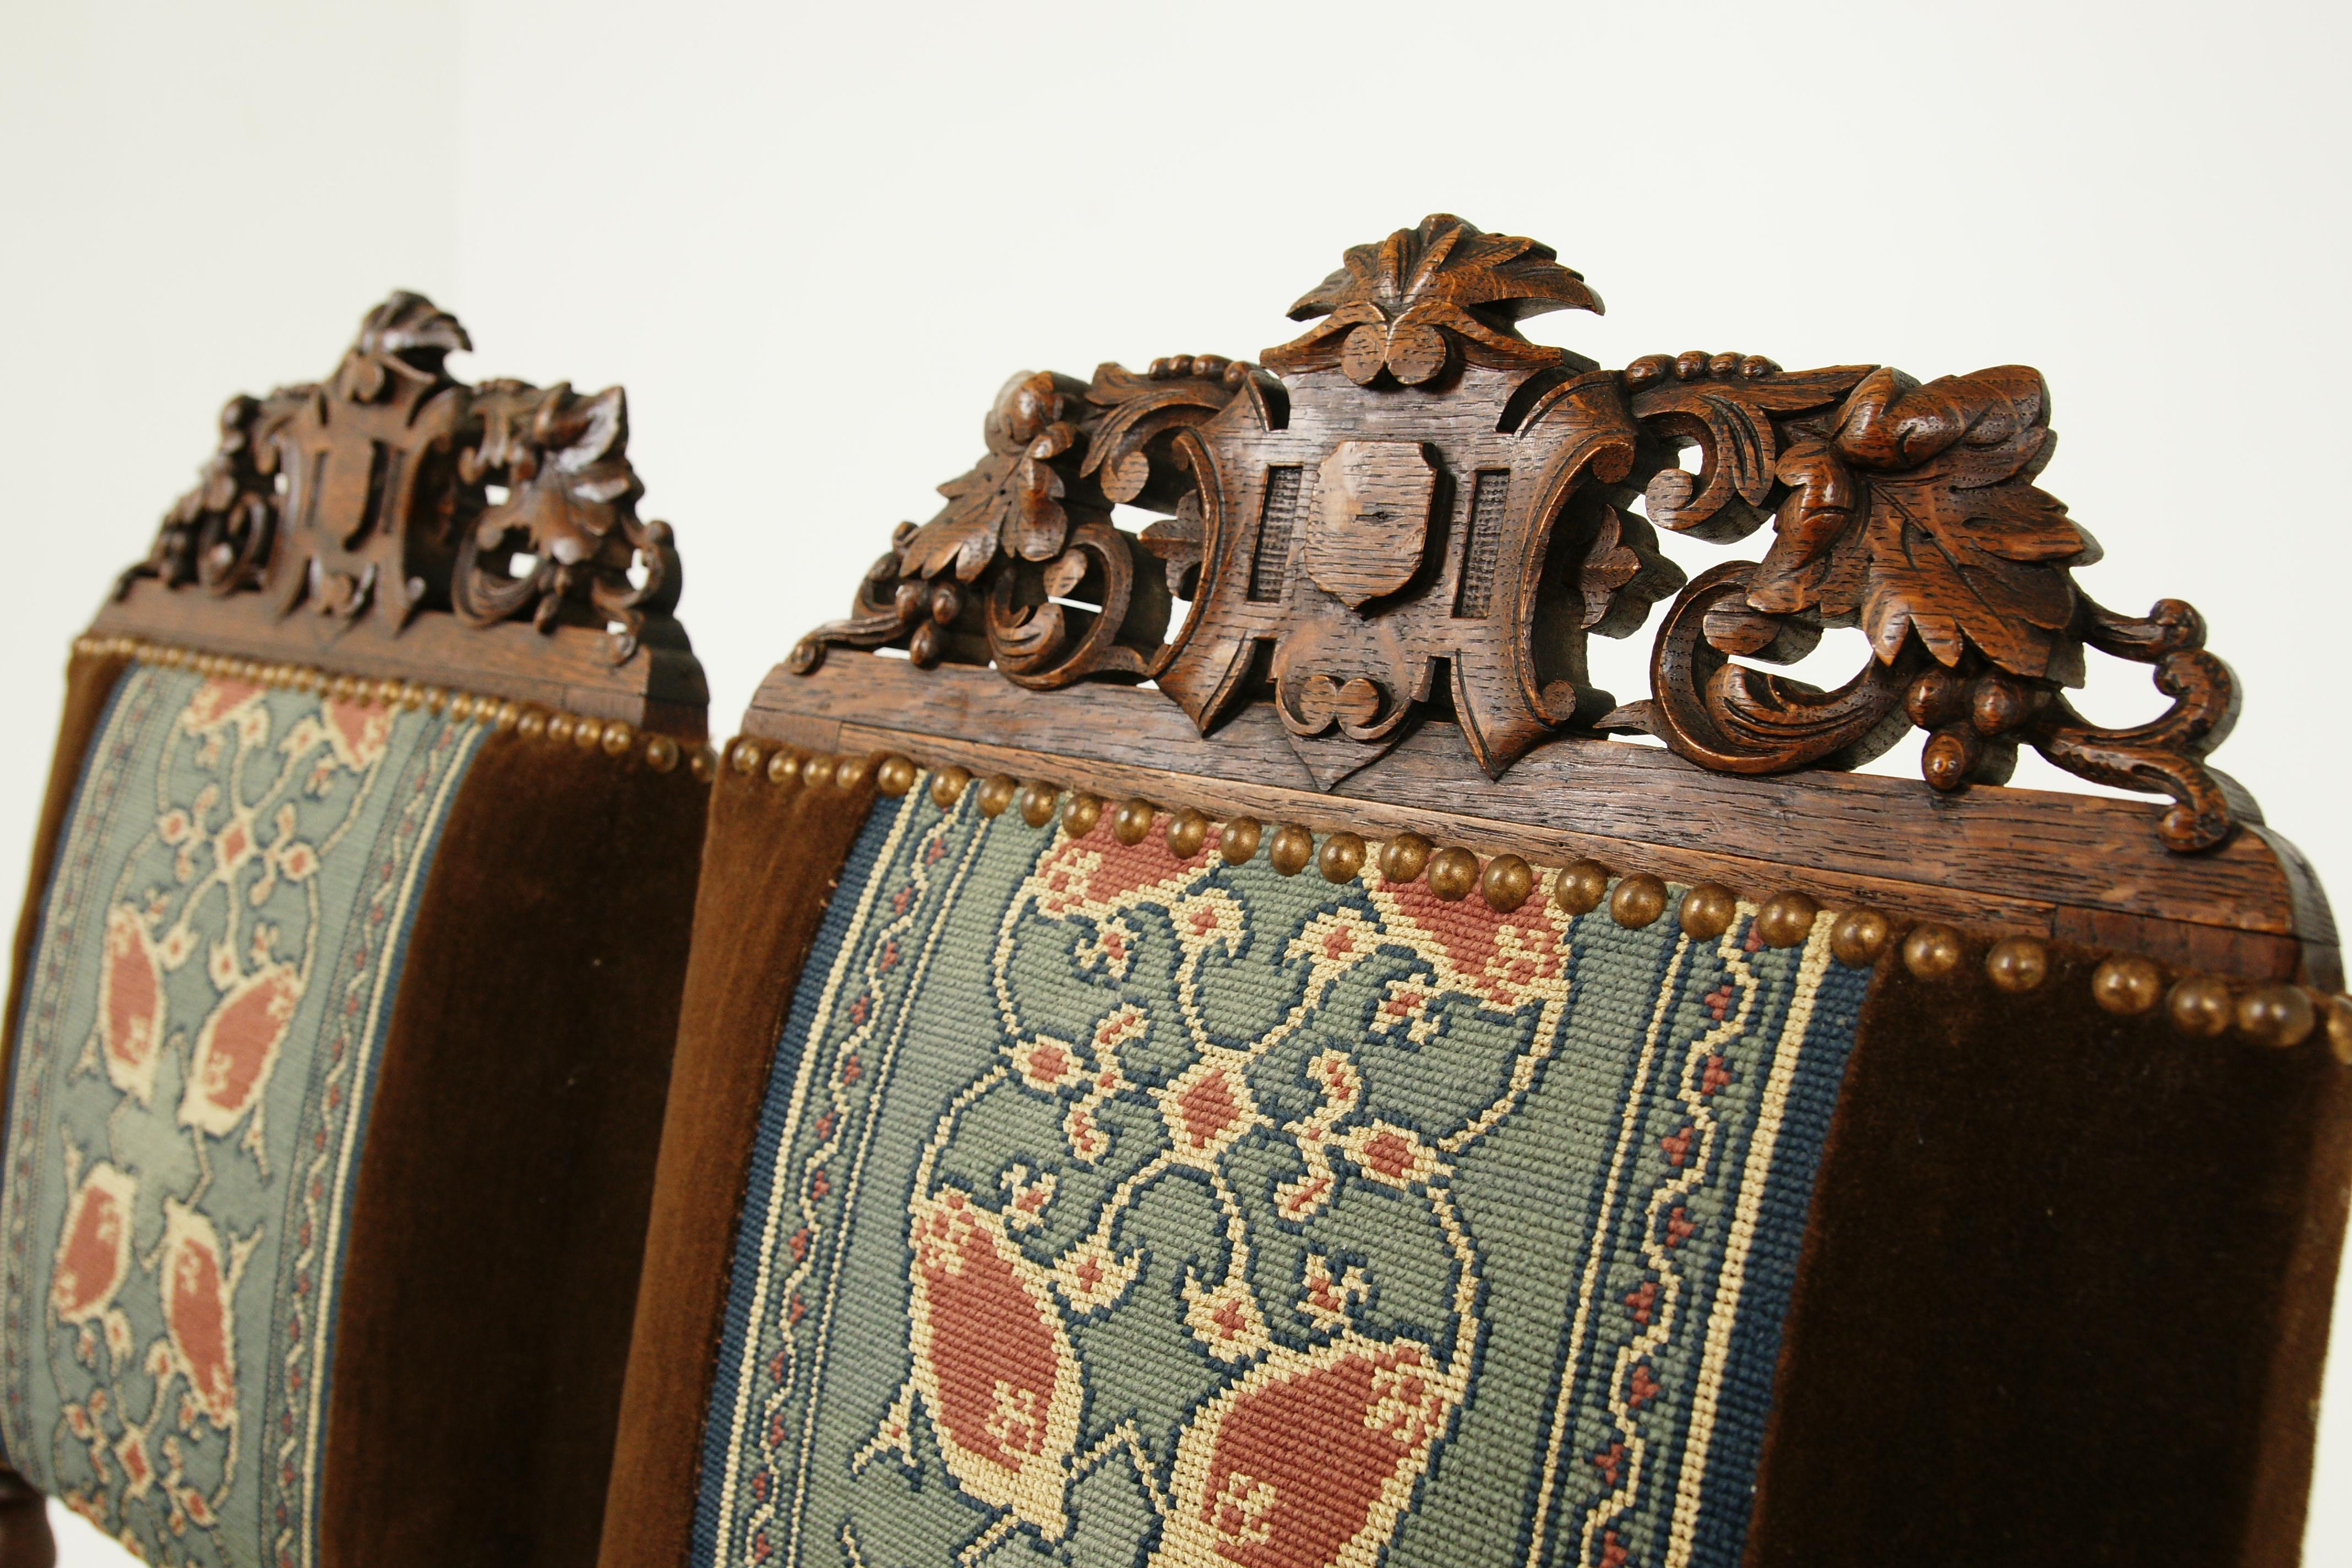 Hand-Crafted Antique Pair of Chairs, Carved Oak, Barley Twist, Upholstered, Scotland 1870